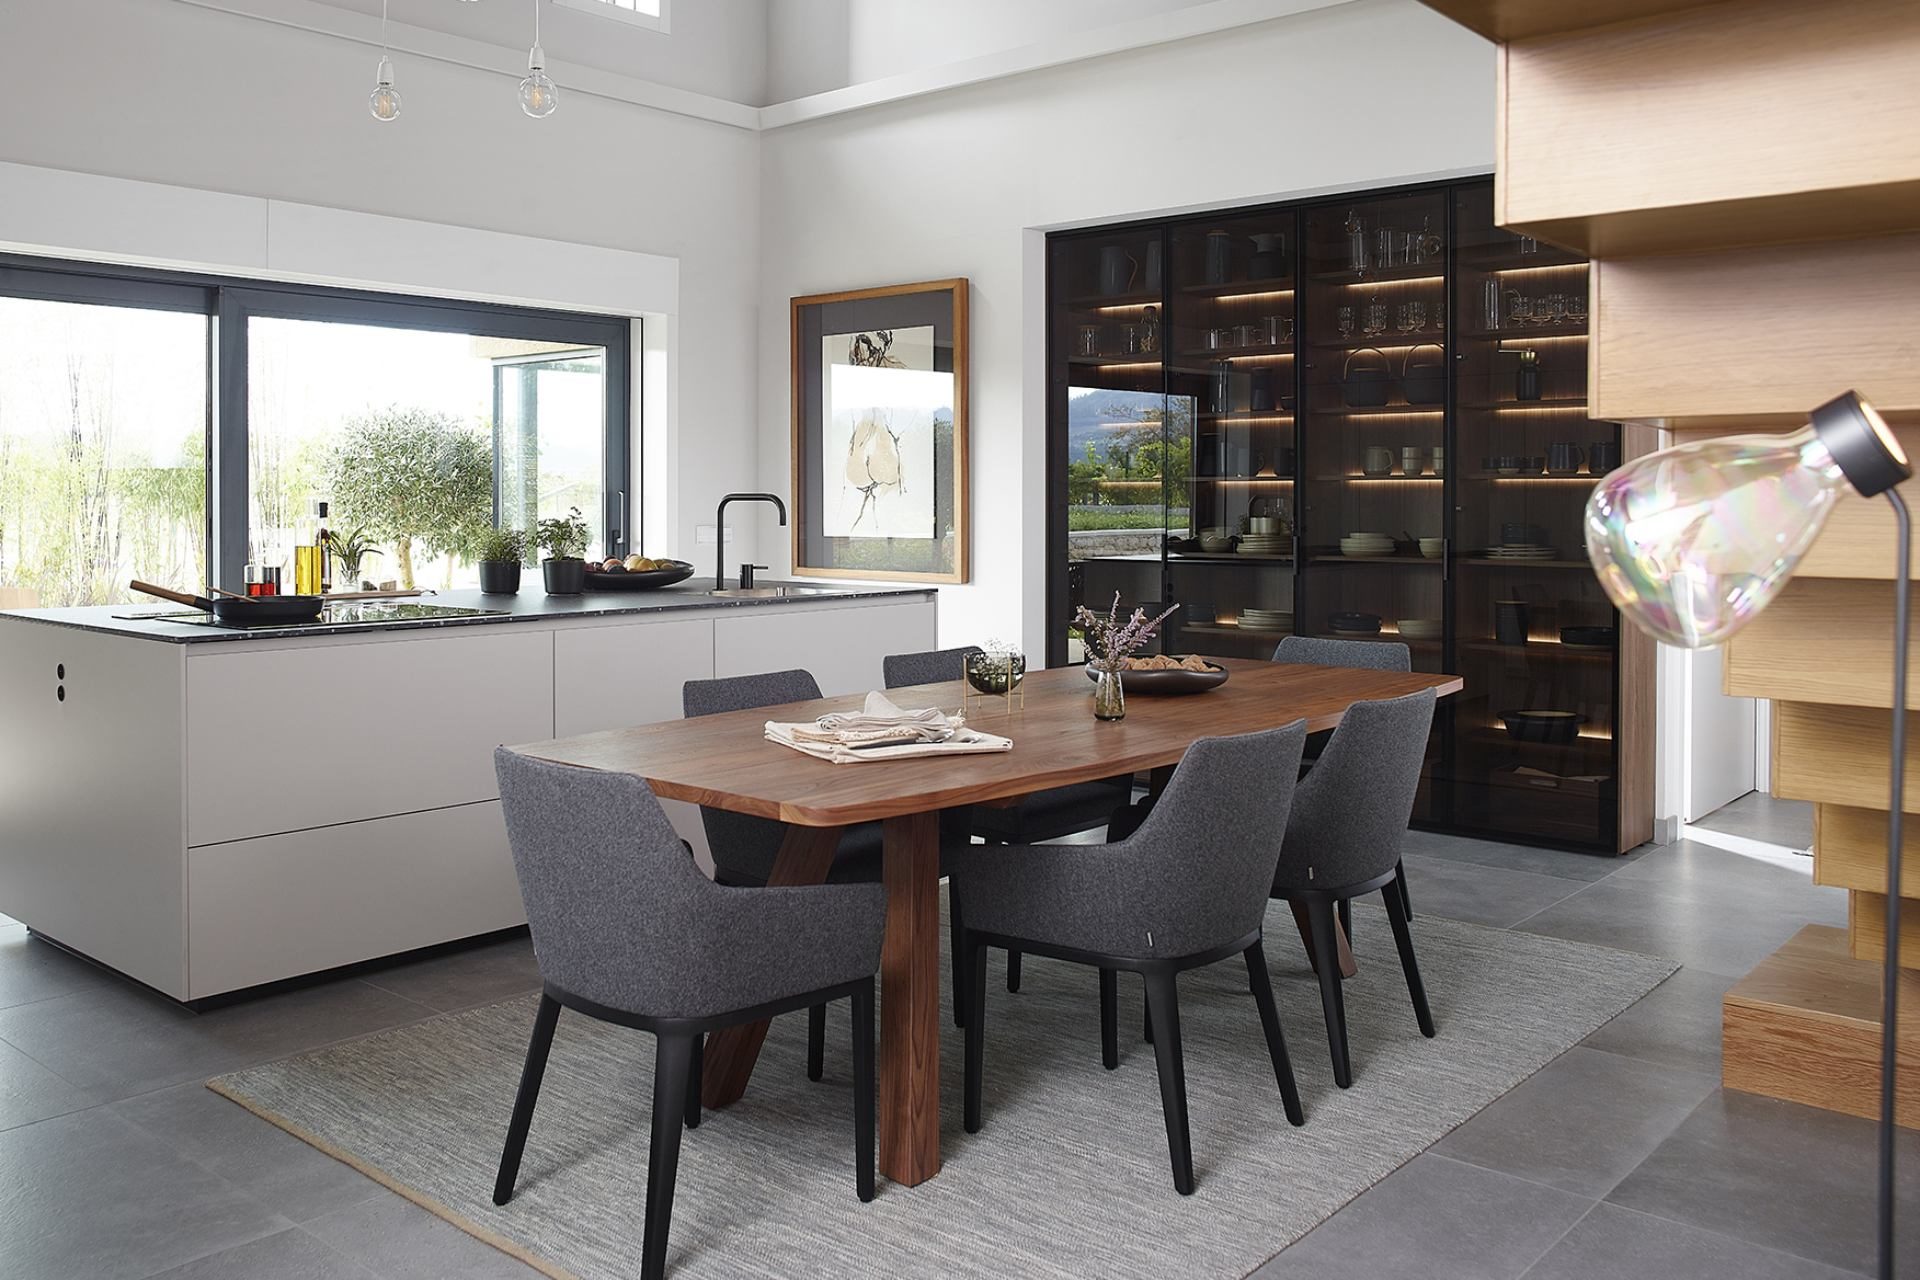 Kitchen with central island, smoked glass cabinet and wooden table